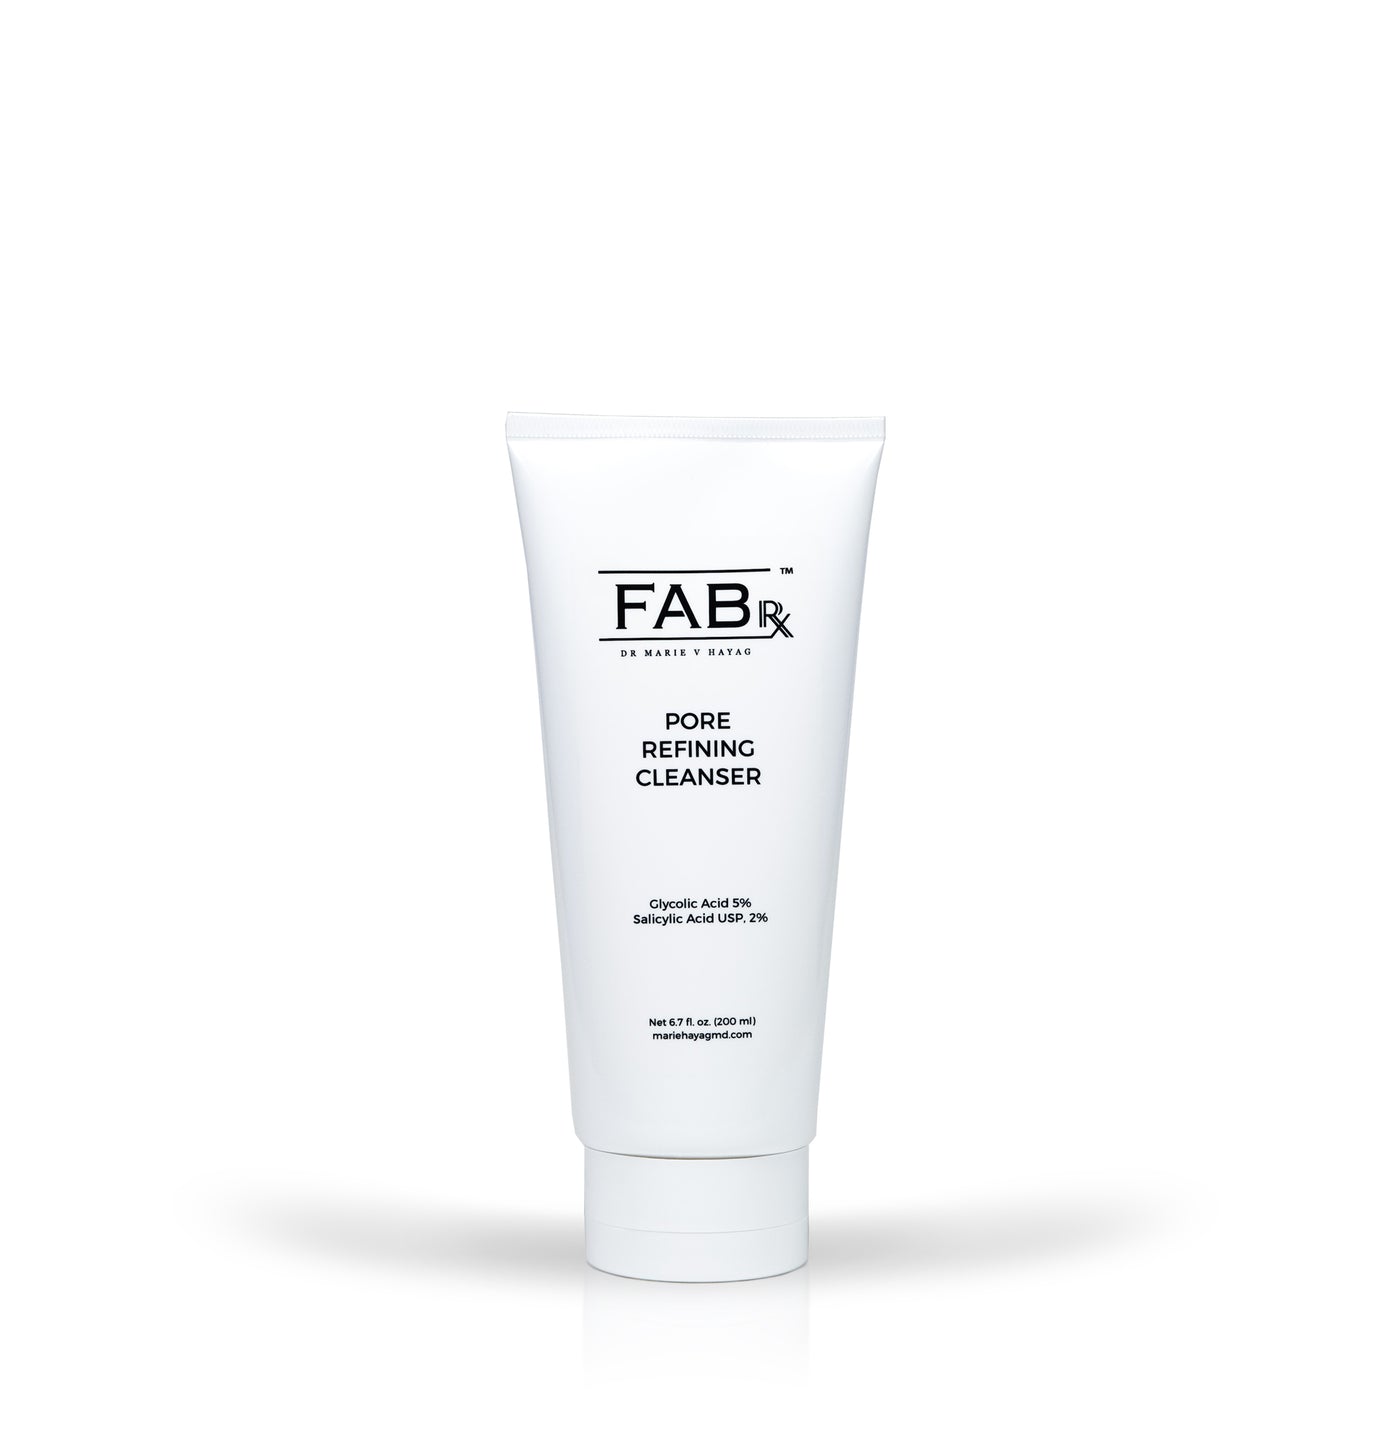 FABrx Pore Refining Cleanser